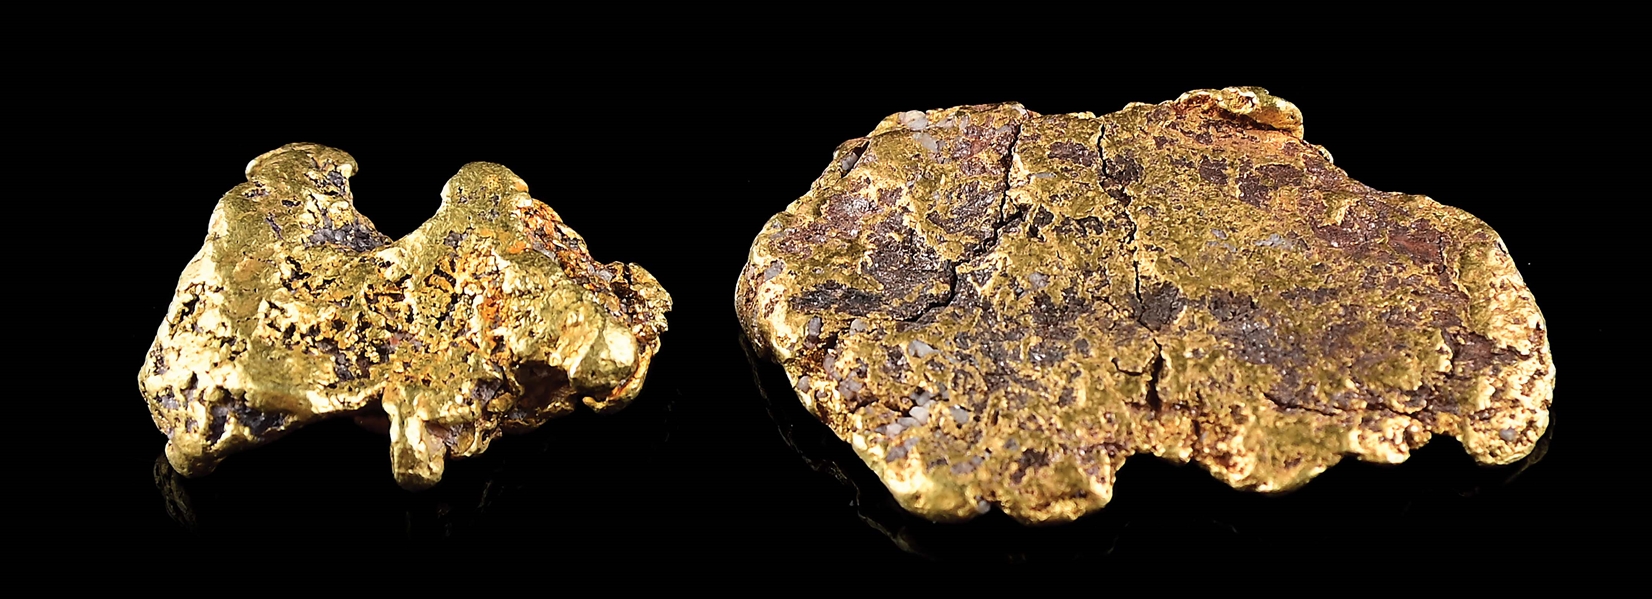 LOT OF 2: GOLD NUGGETS 